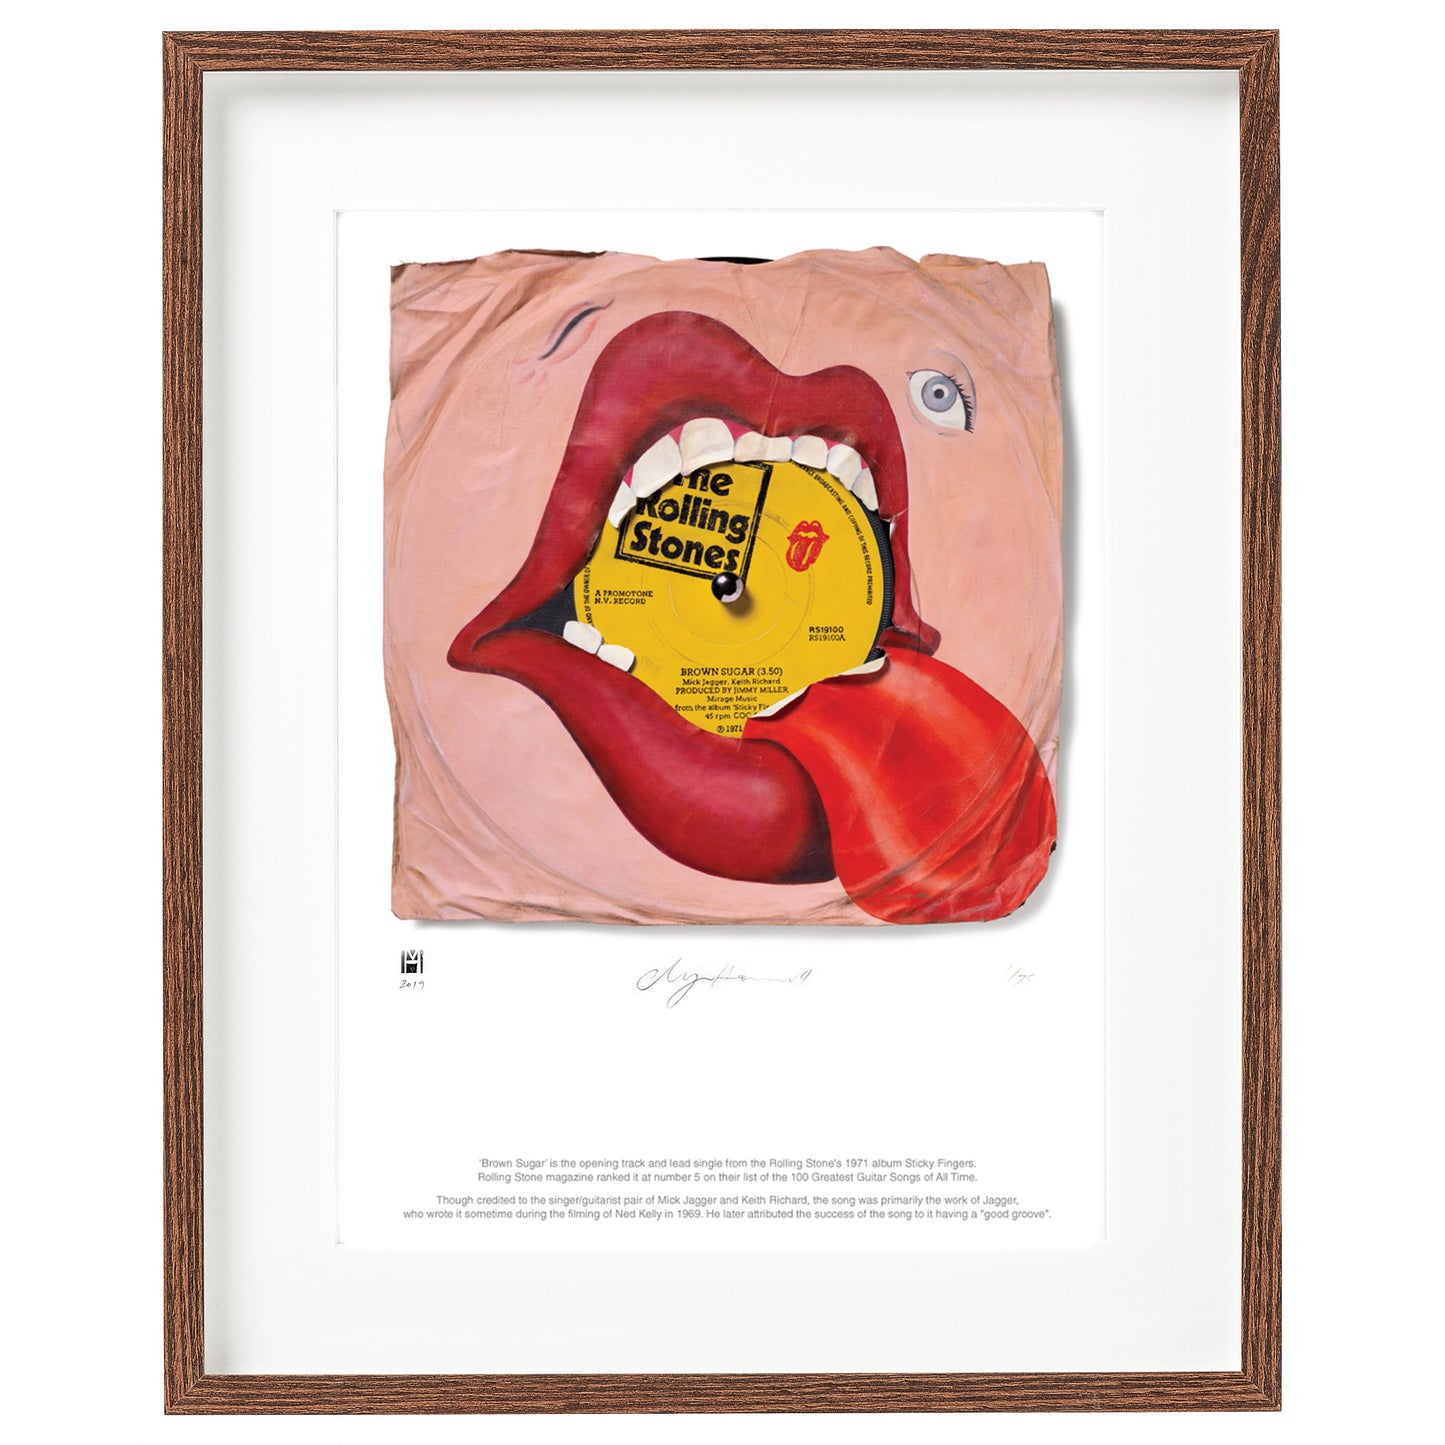 Brown Sugar'' by The Rolling Stones Limited Edition Print of Original Painting